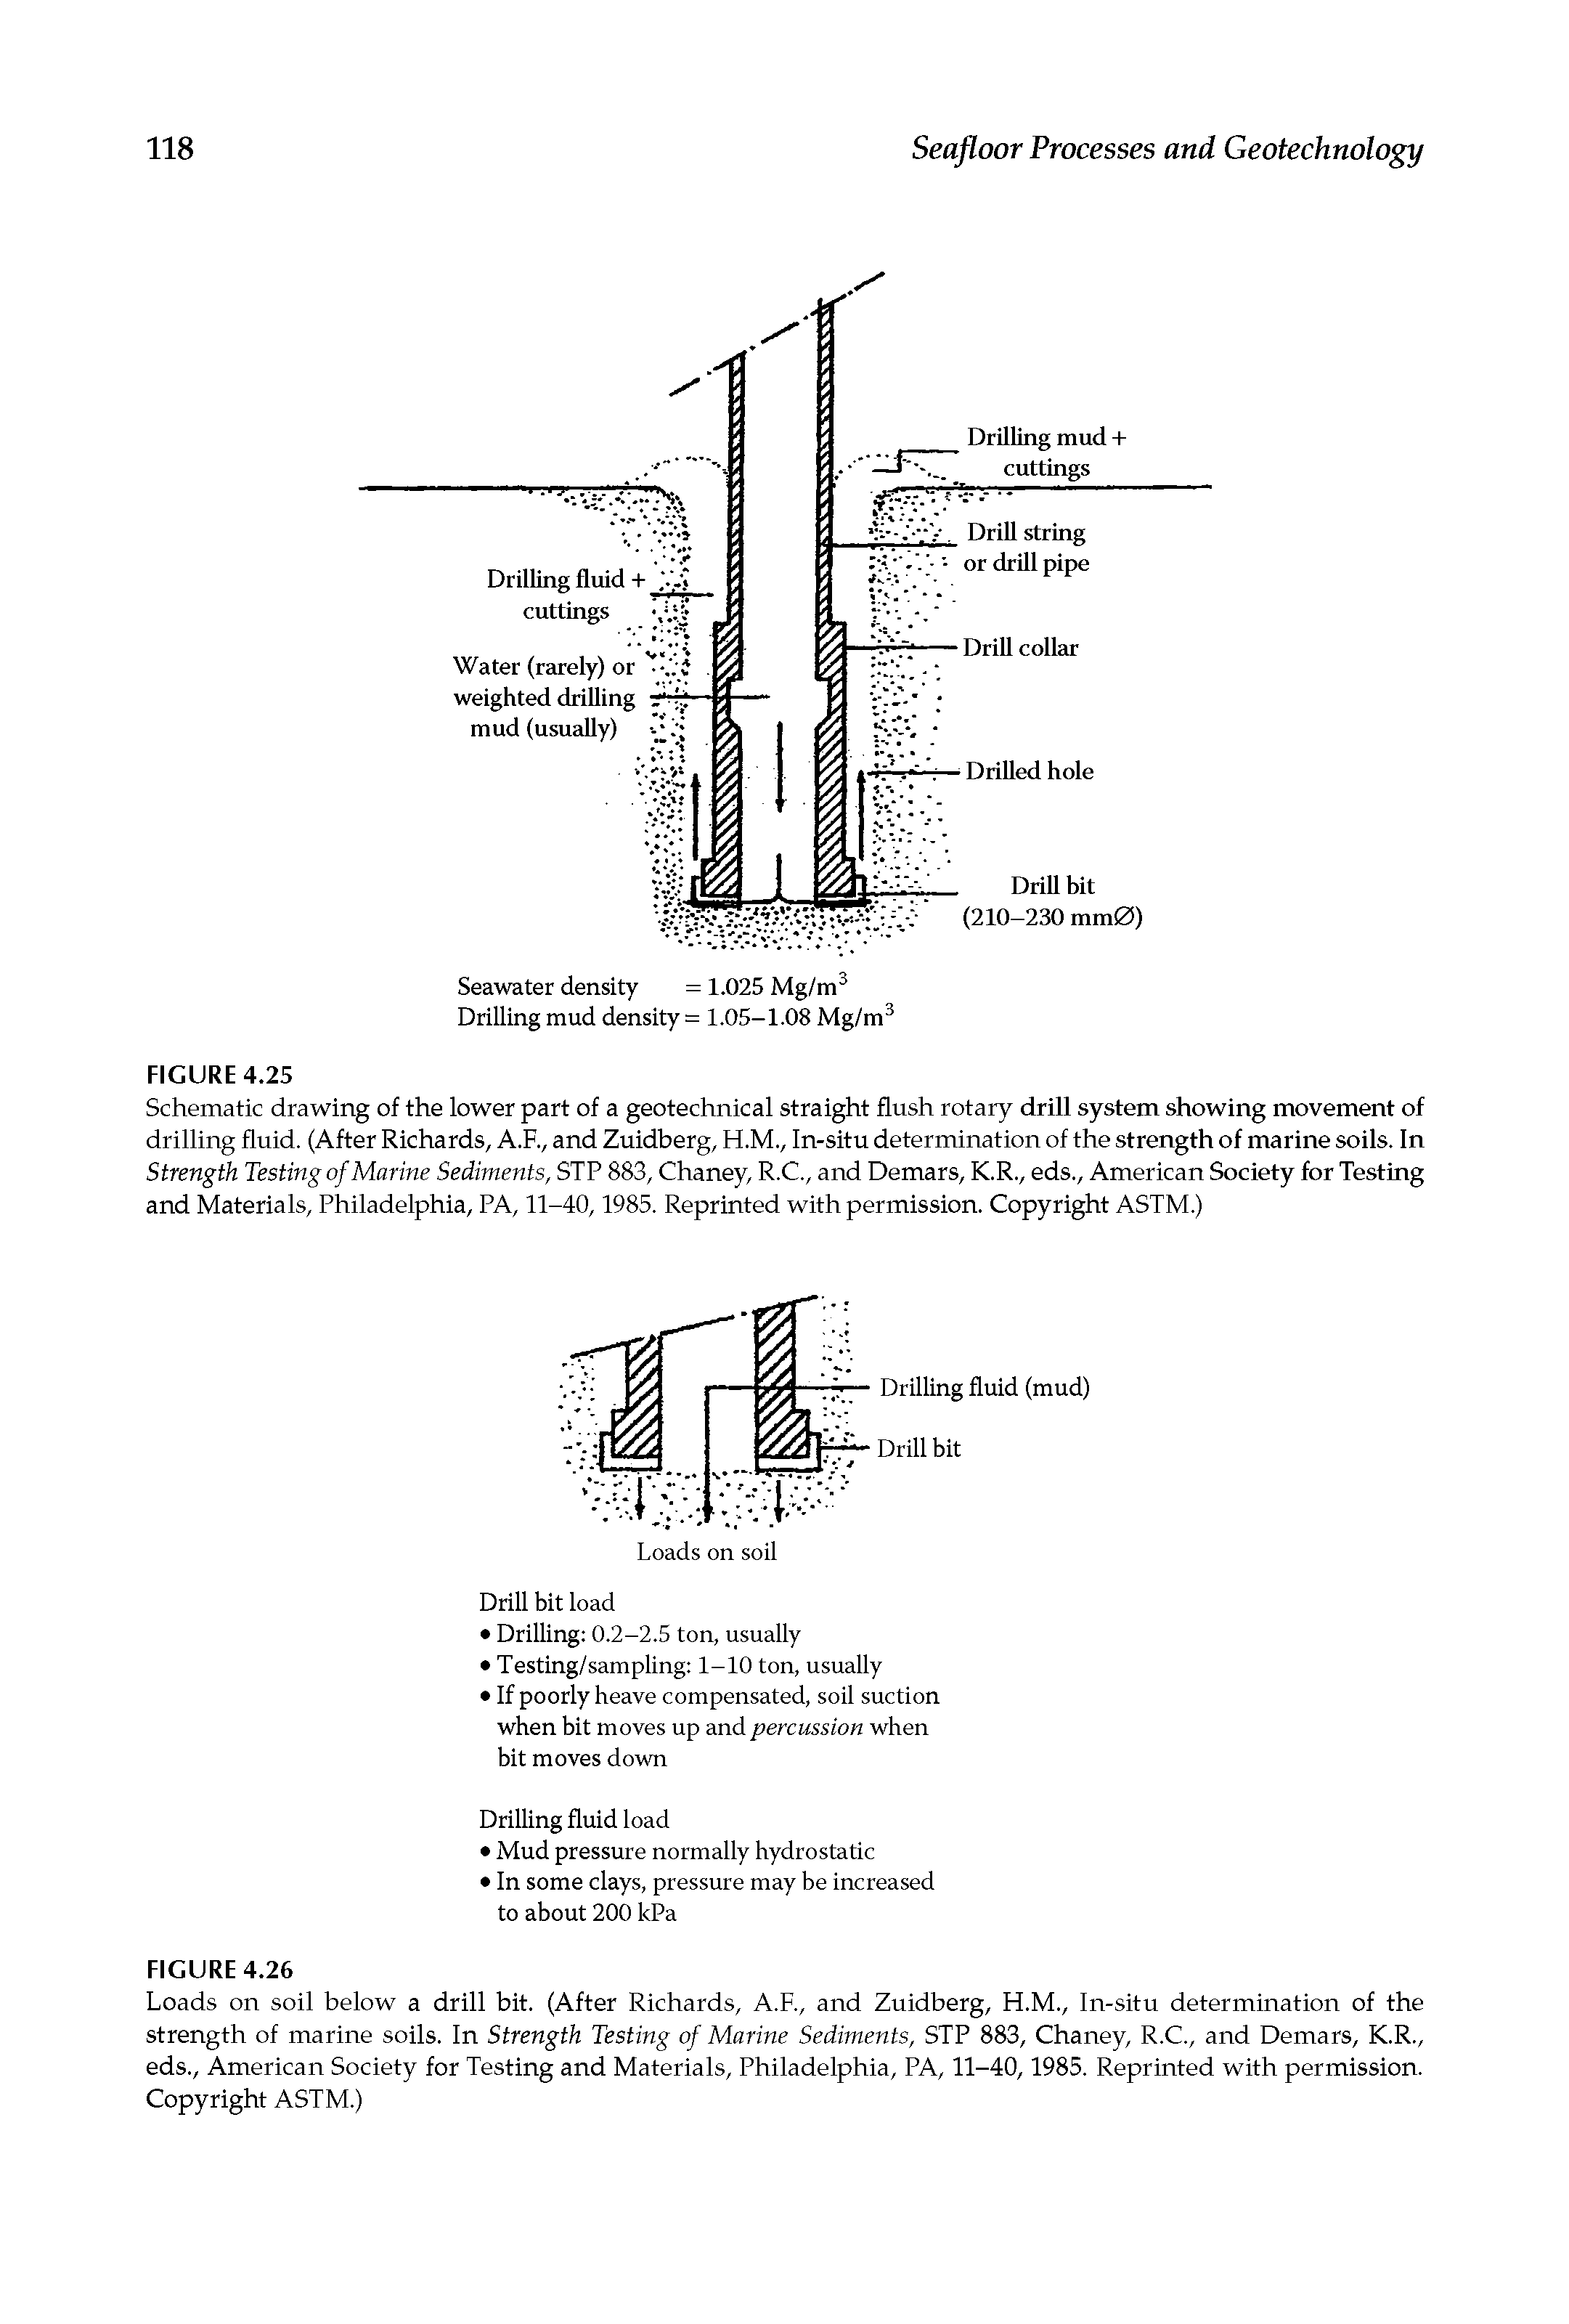 Schematic drawing of the lower part of a geotechnical straight flush rotary drill system showing movement of drilling fluid. (After Richards, A.F., and Zuidberg, H.M., In-situ determination of the strength of marine soils. In Strength Testing of Marine Sediments, STP 883, Chaney, R.C., and Demars, K.R., eds., American Society for Testing and Materials, Philadelphia, PA, 11-40,1985. Reprinted with permission. Copyright ASTM.)...